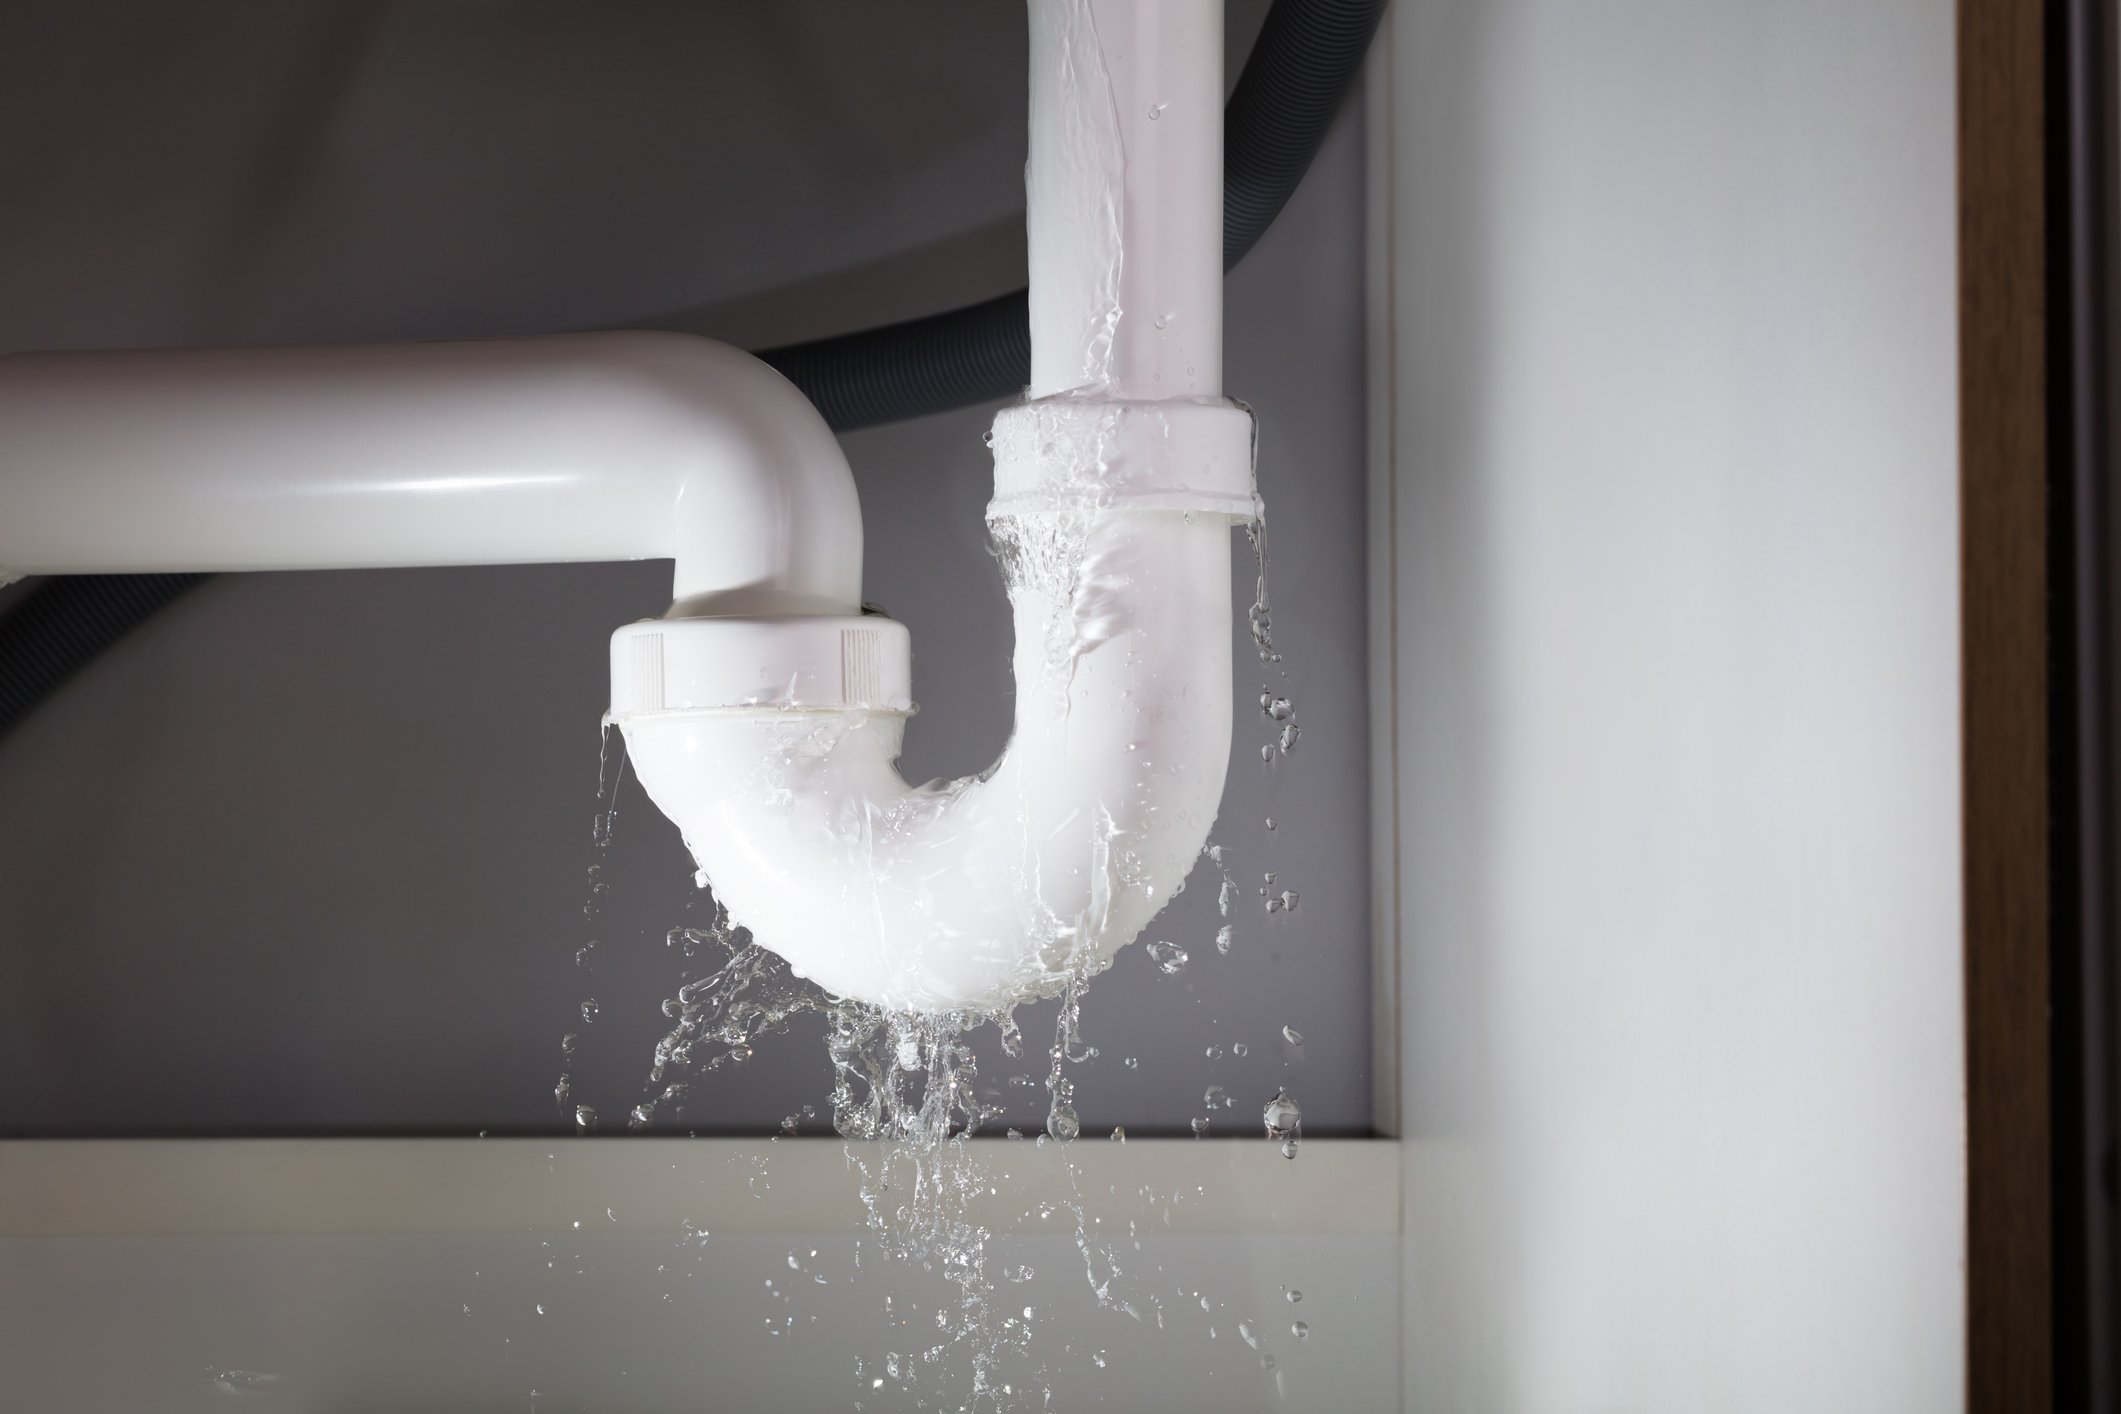 What are the common causes of water damage?